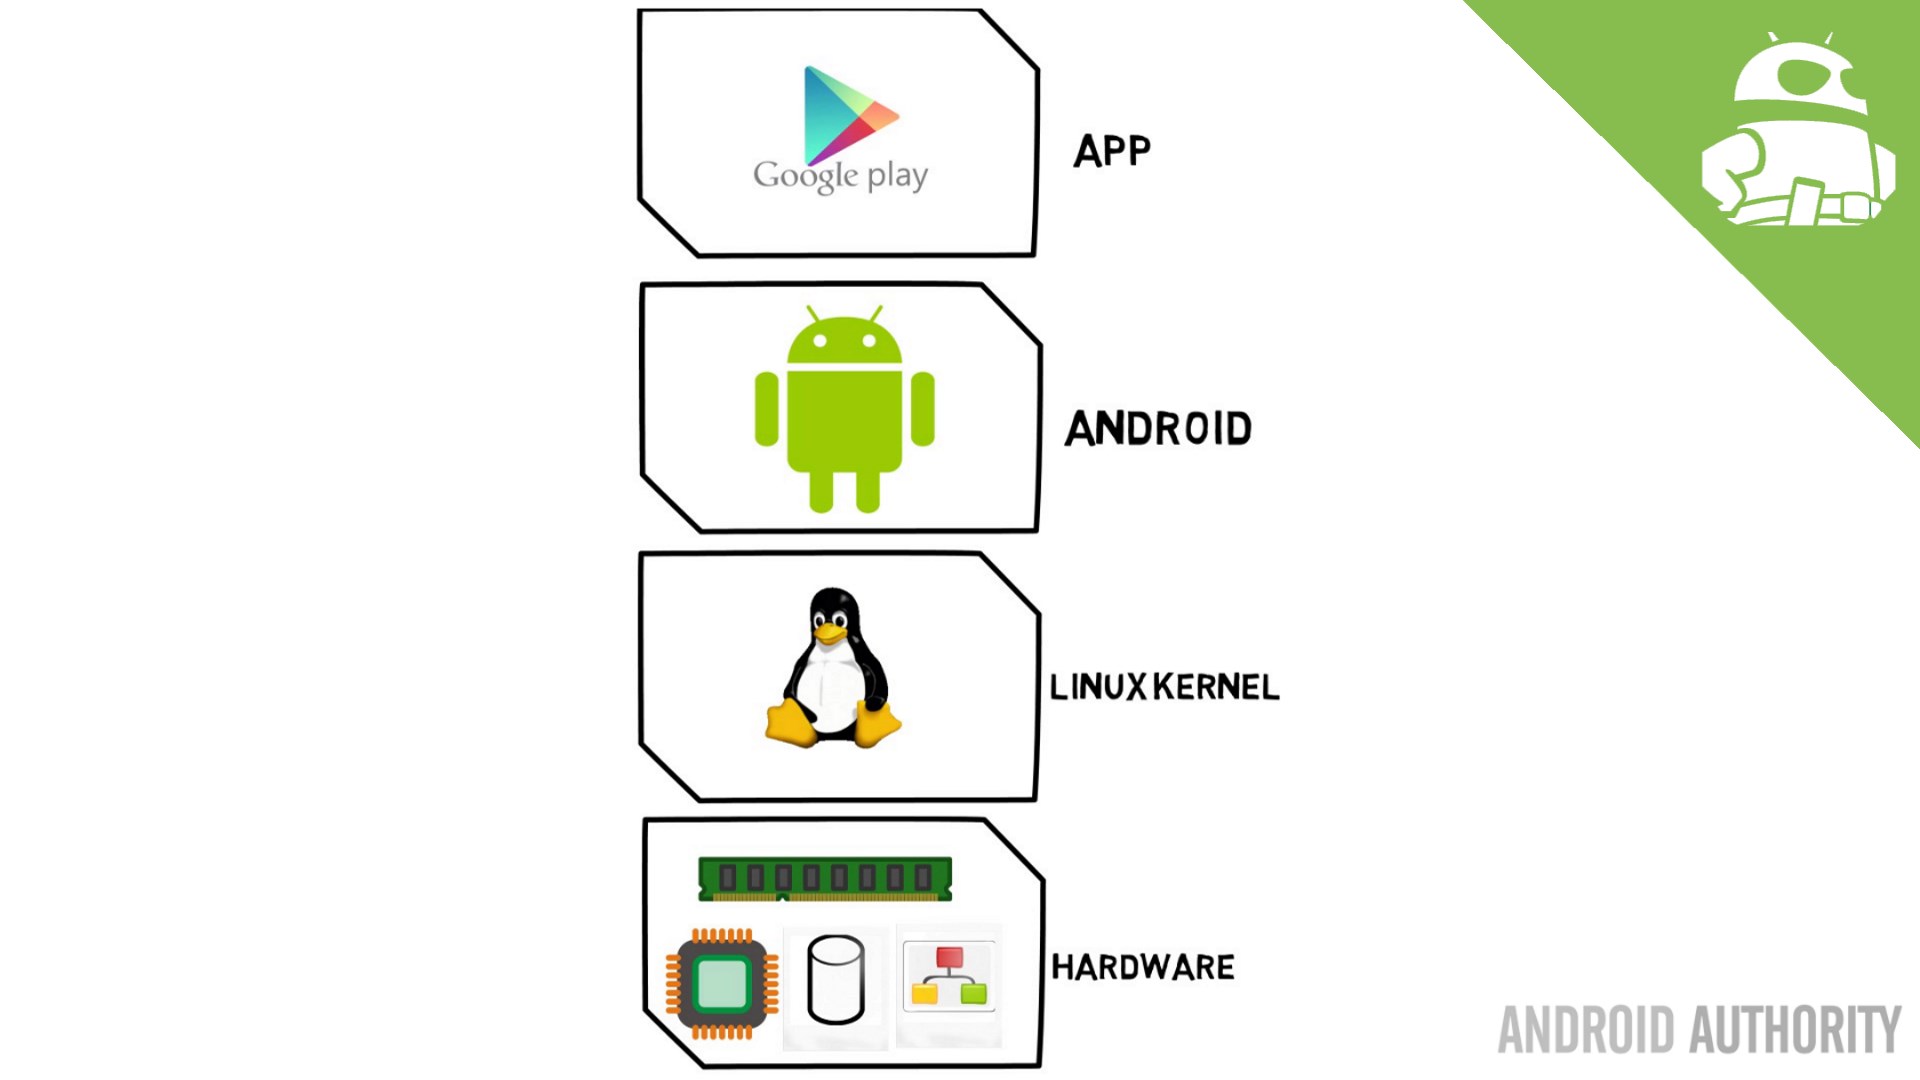 que ations kernel en android